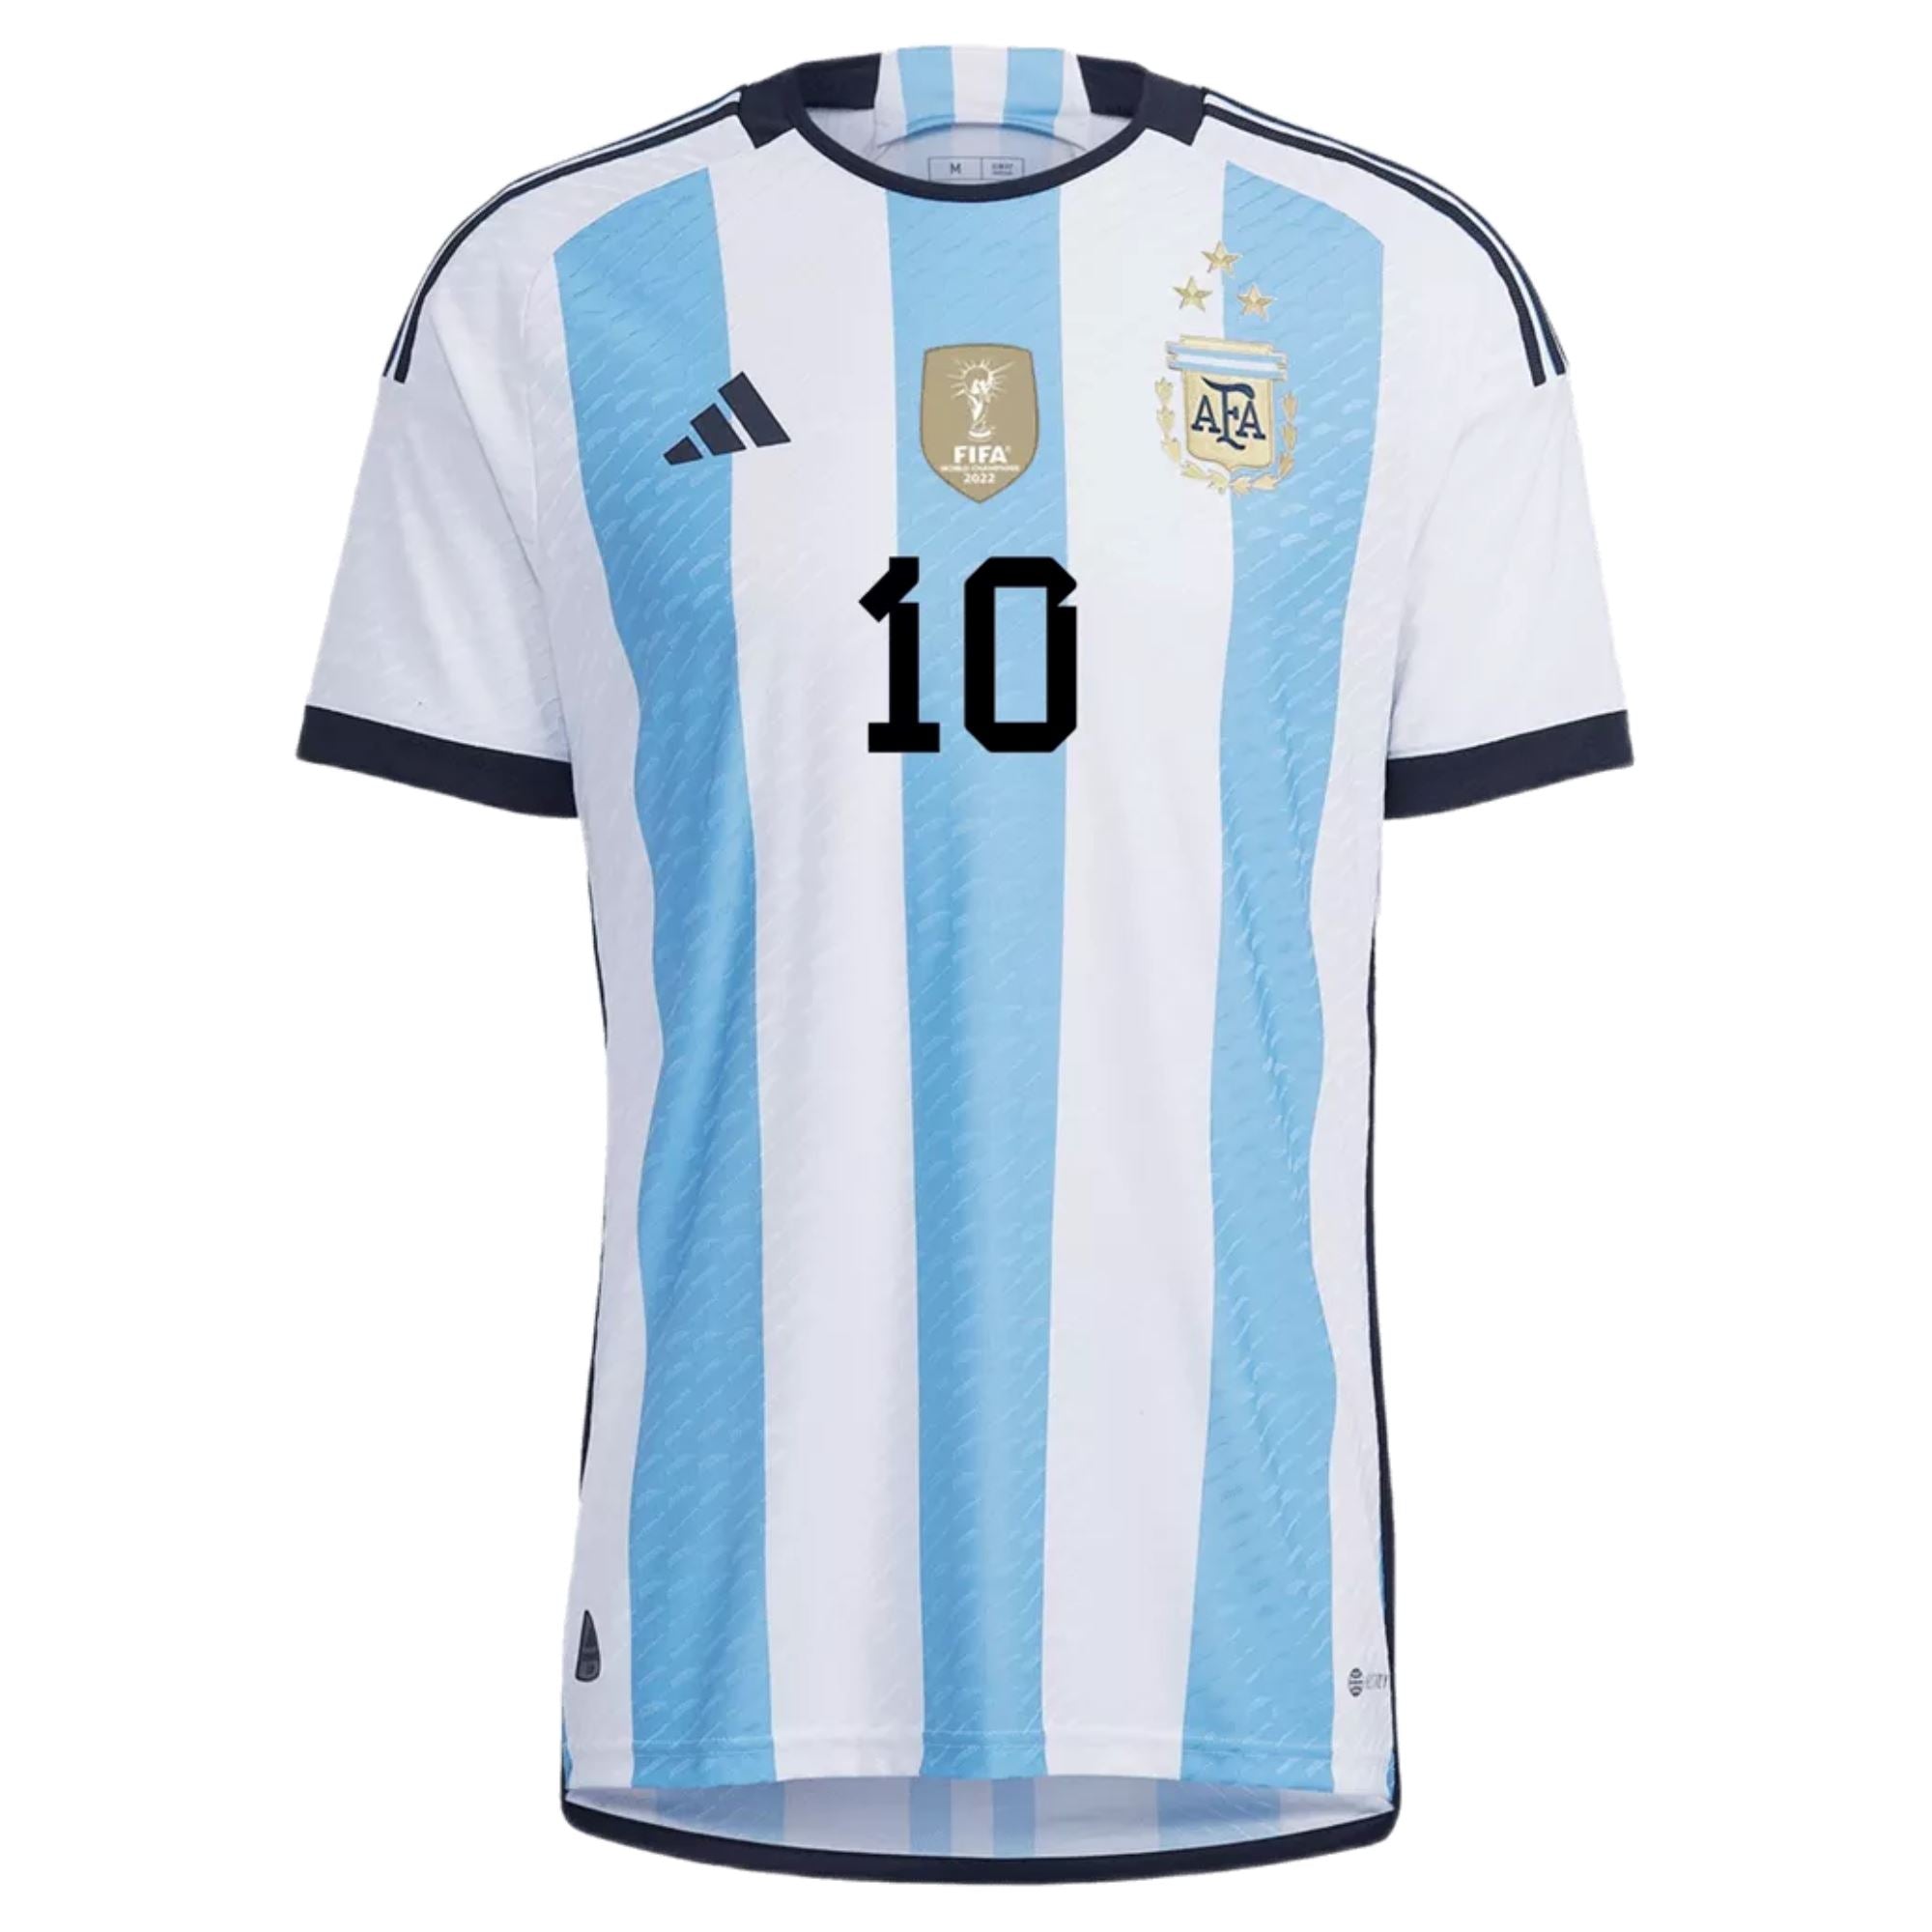 Argentina World Cup Winners Jersey Authentic 22/23 Messi #10 – ITASPORT